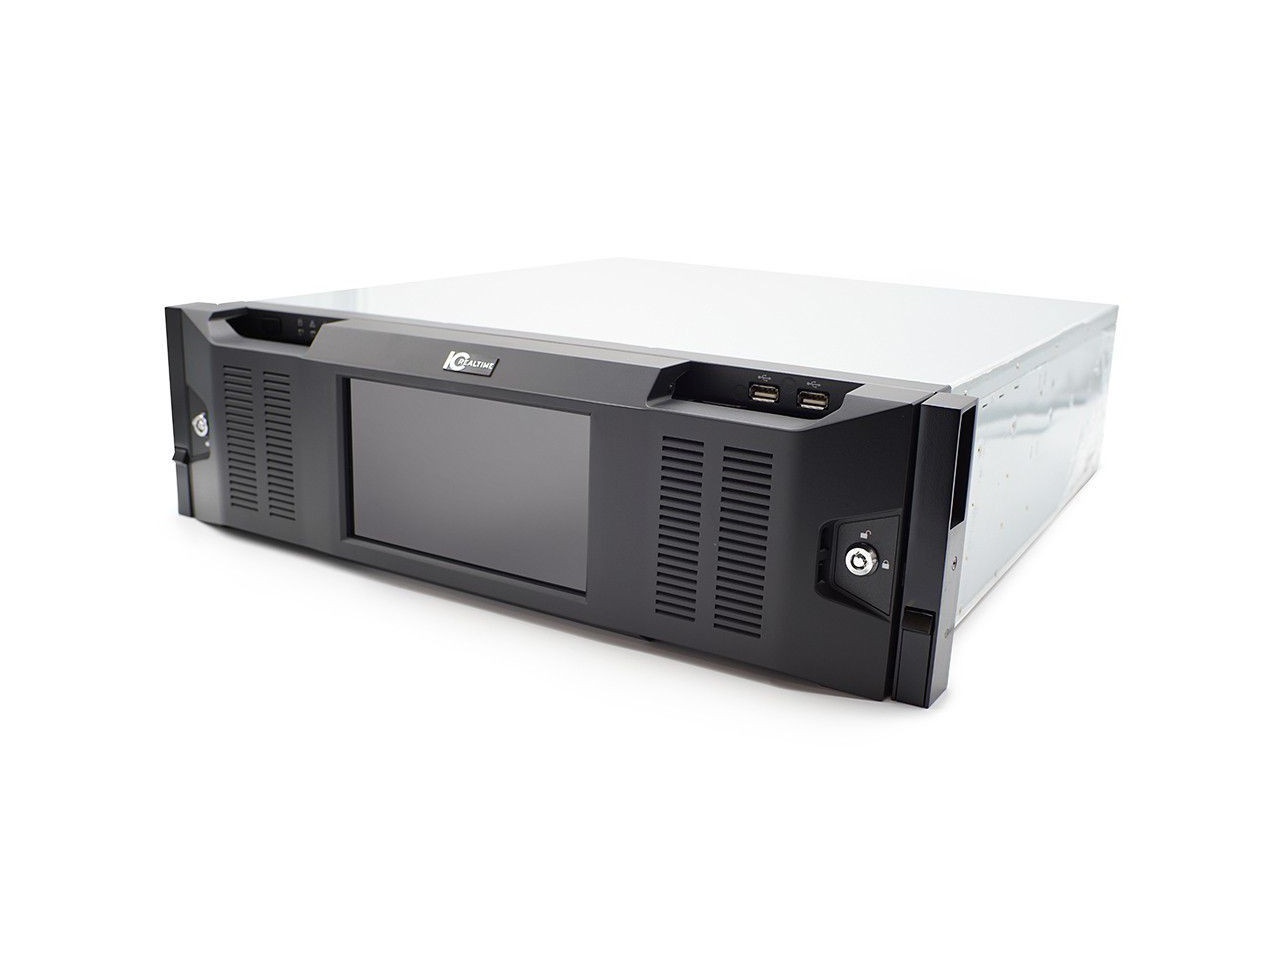 ICRealtime NVR-EL128-4U12MP1-10TB 128 Channel Embedded 4K NVR/Enhanced H.264/up to 12MP/10TB